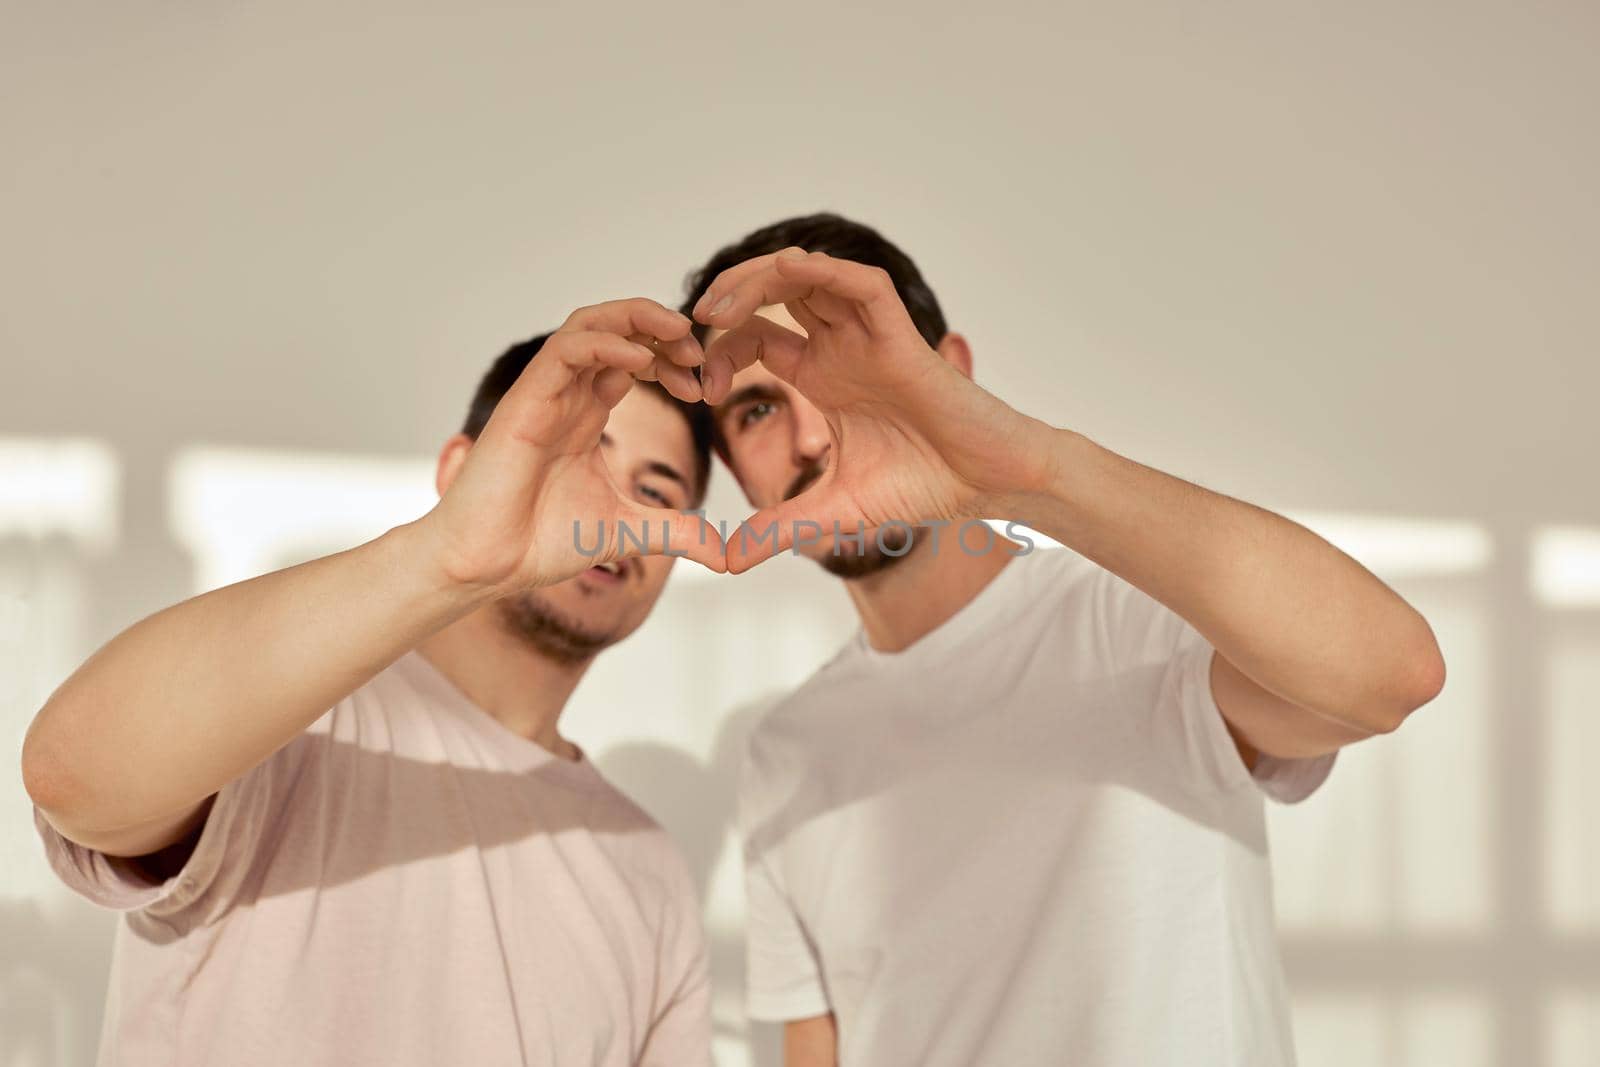 Gay couple of men make heart shape out of hands by Demkat